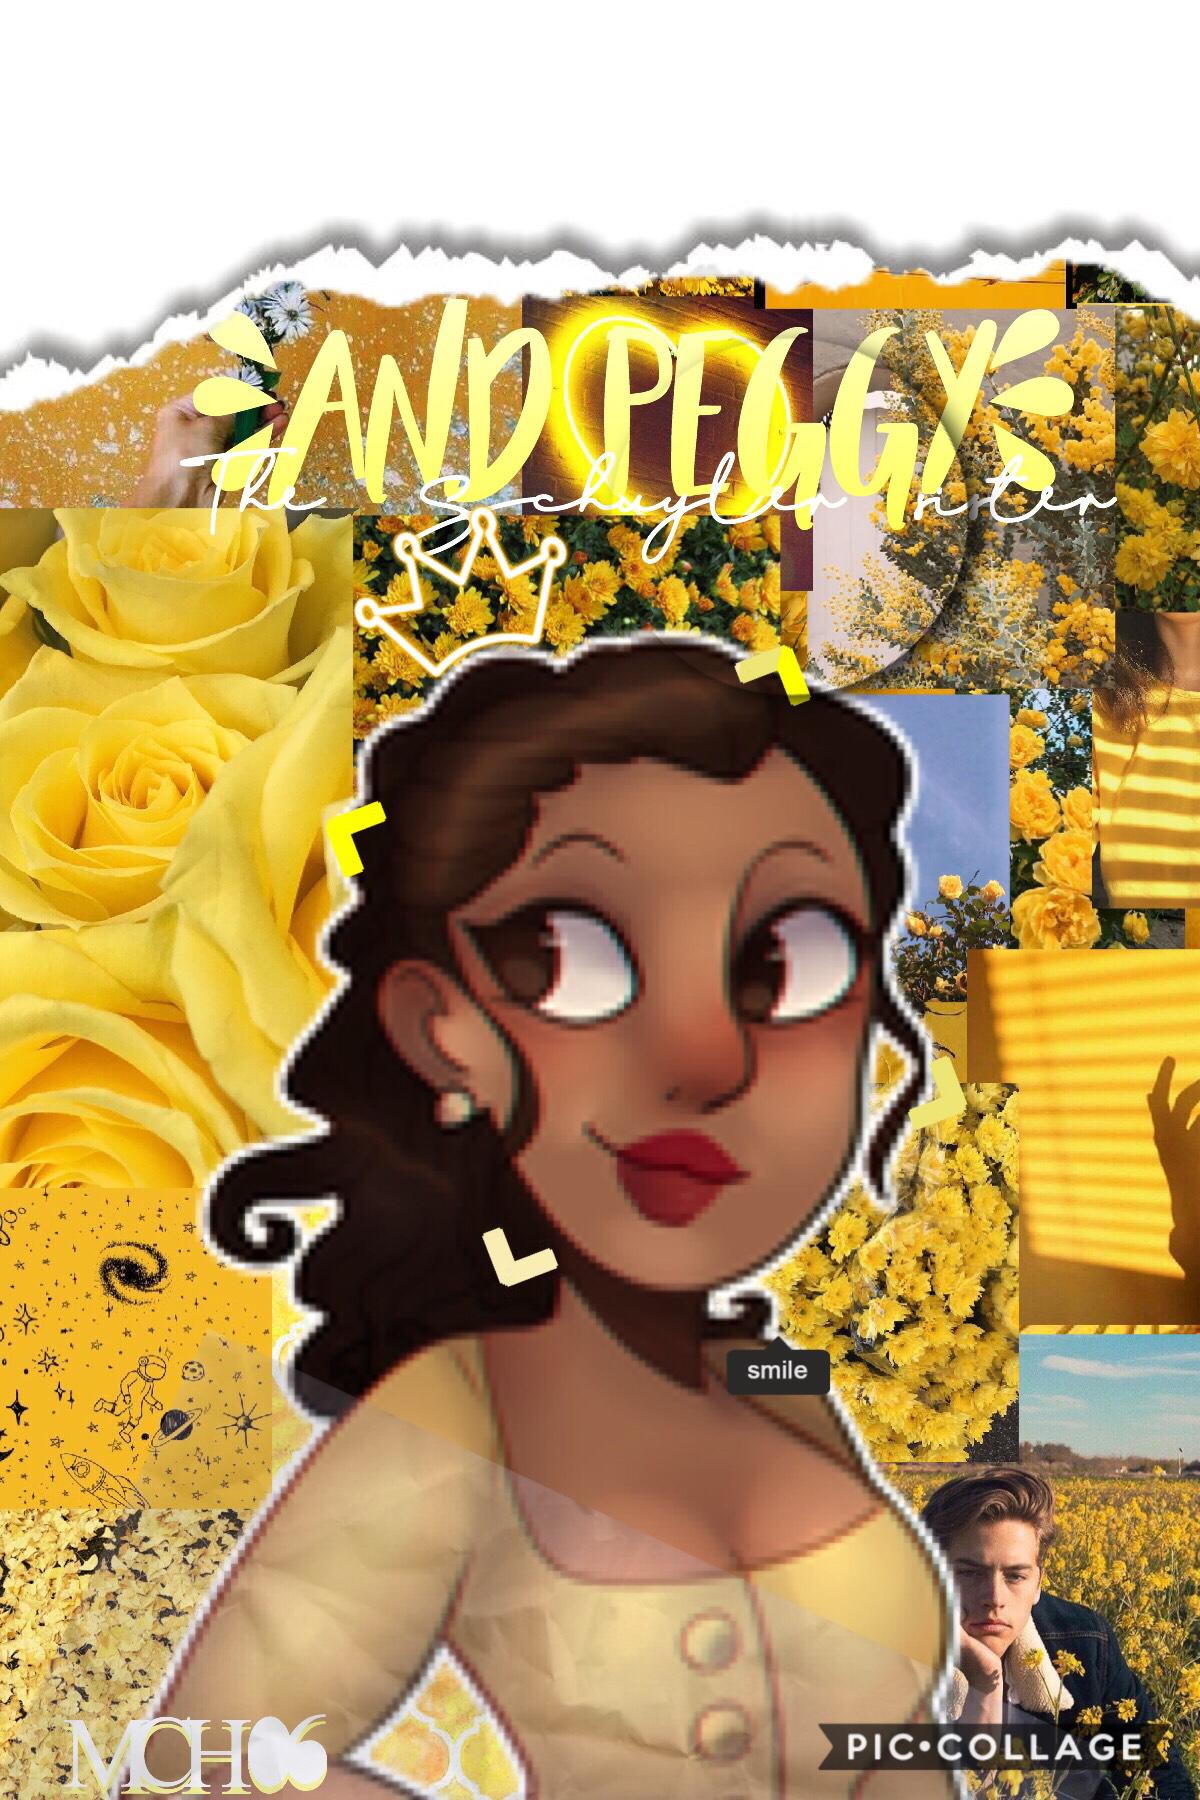 And 🅿️eggy! This is NY last Schuyler Sister edit out of Mt Hamilton theme. Comment more Hamilton characters below. For my bd I got almost all clothes, a Hamilton book (Alex & Eliza) and a Rose gold necklace with an M for my name